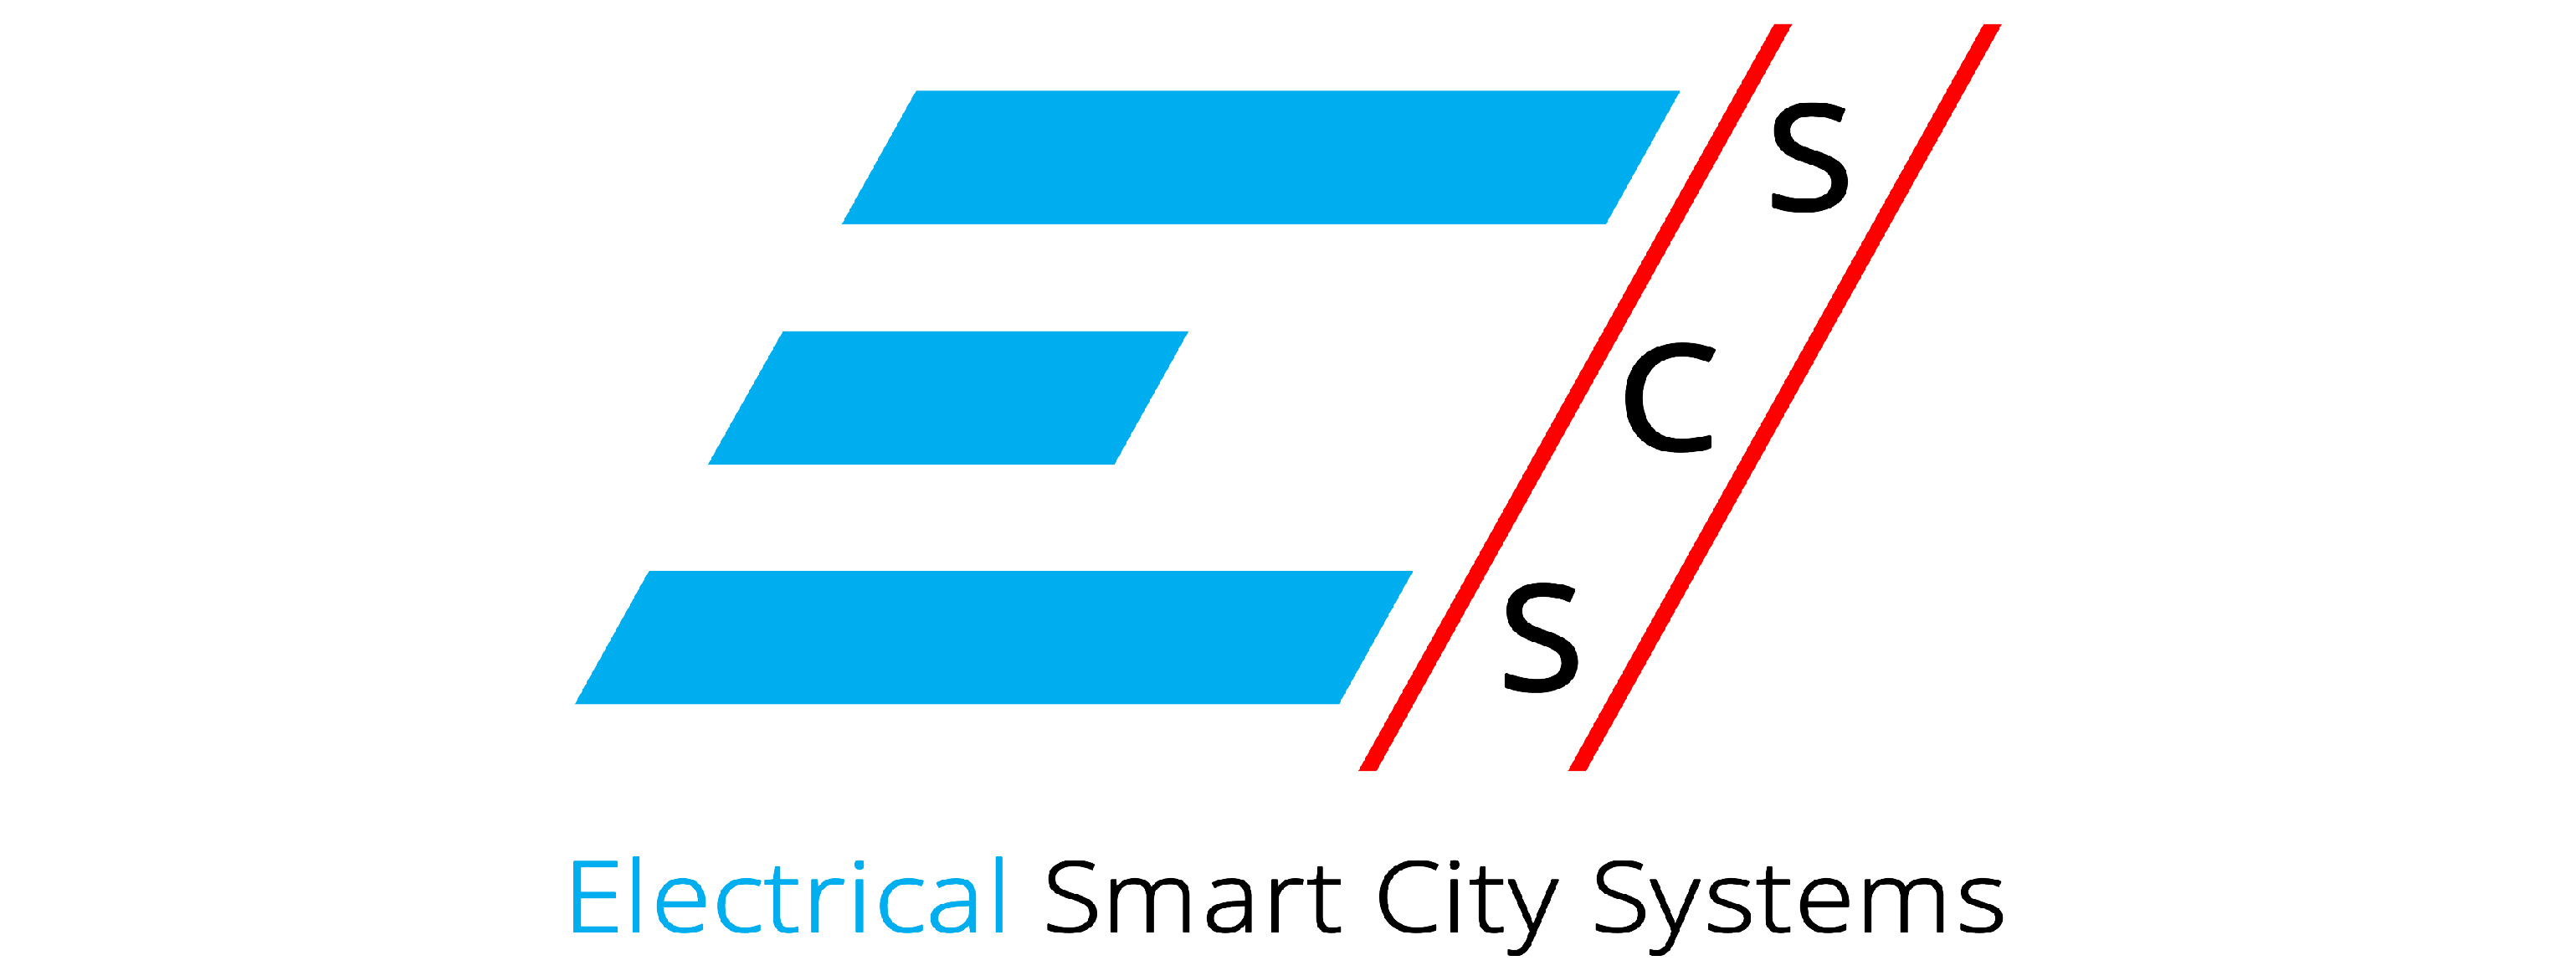 Chair of Electrical Smart City Systems | ESCS